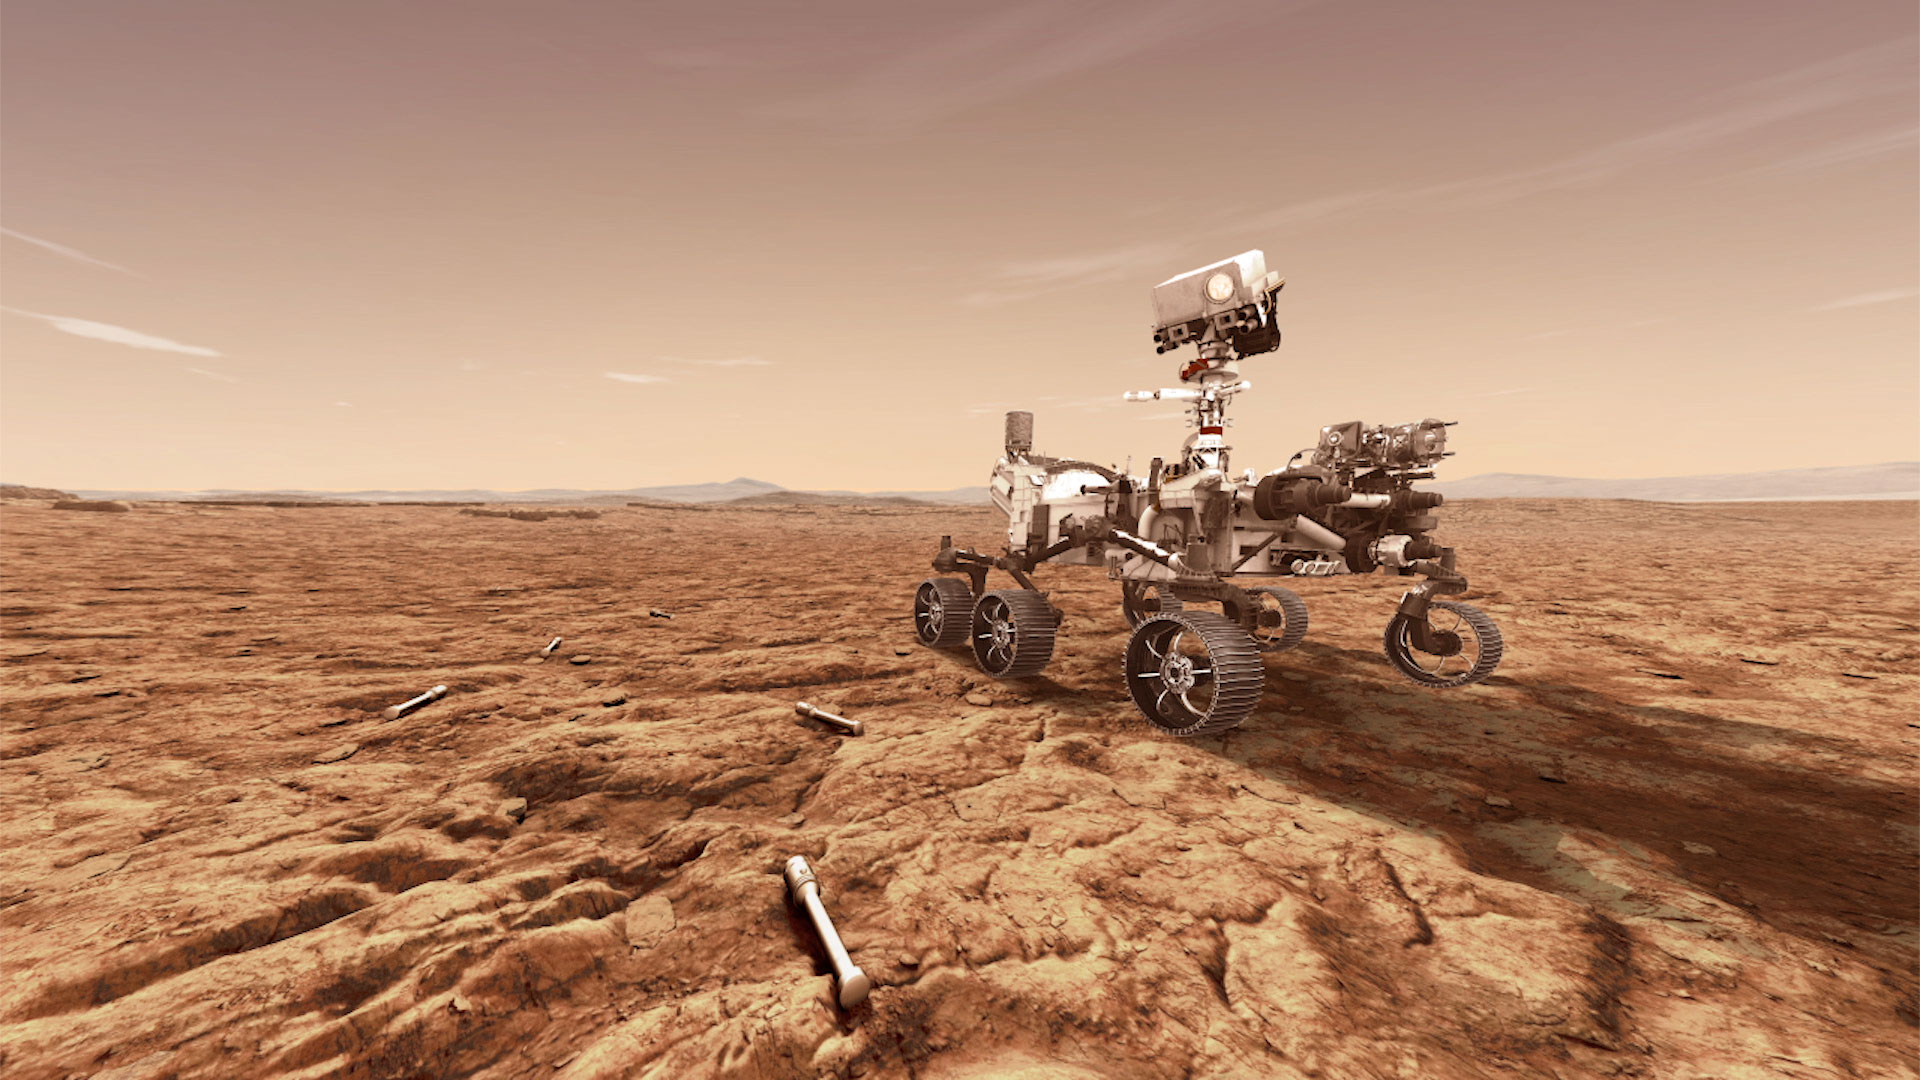 The Perseverance rover has already collected 8 Mars samples (Photo illustration by NASA via Getty Images)